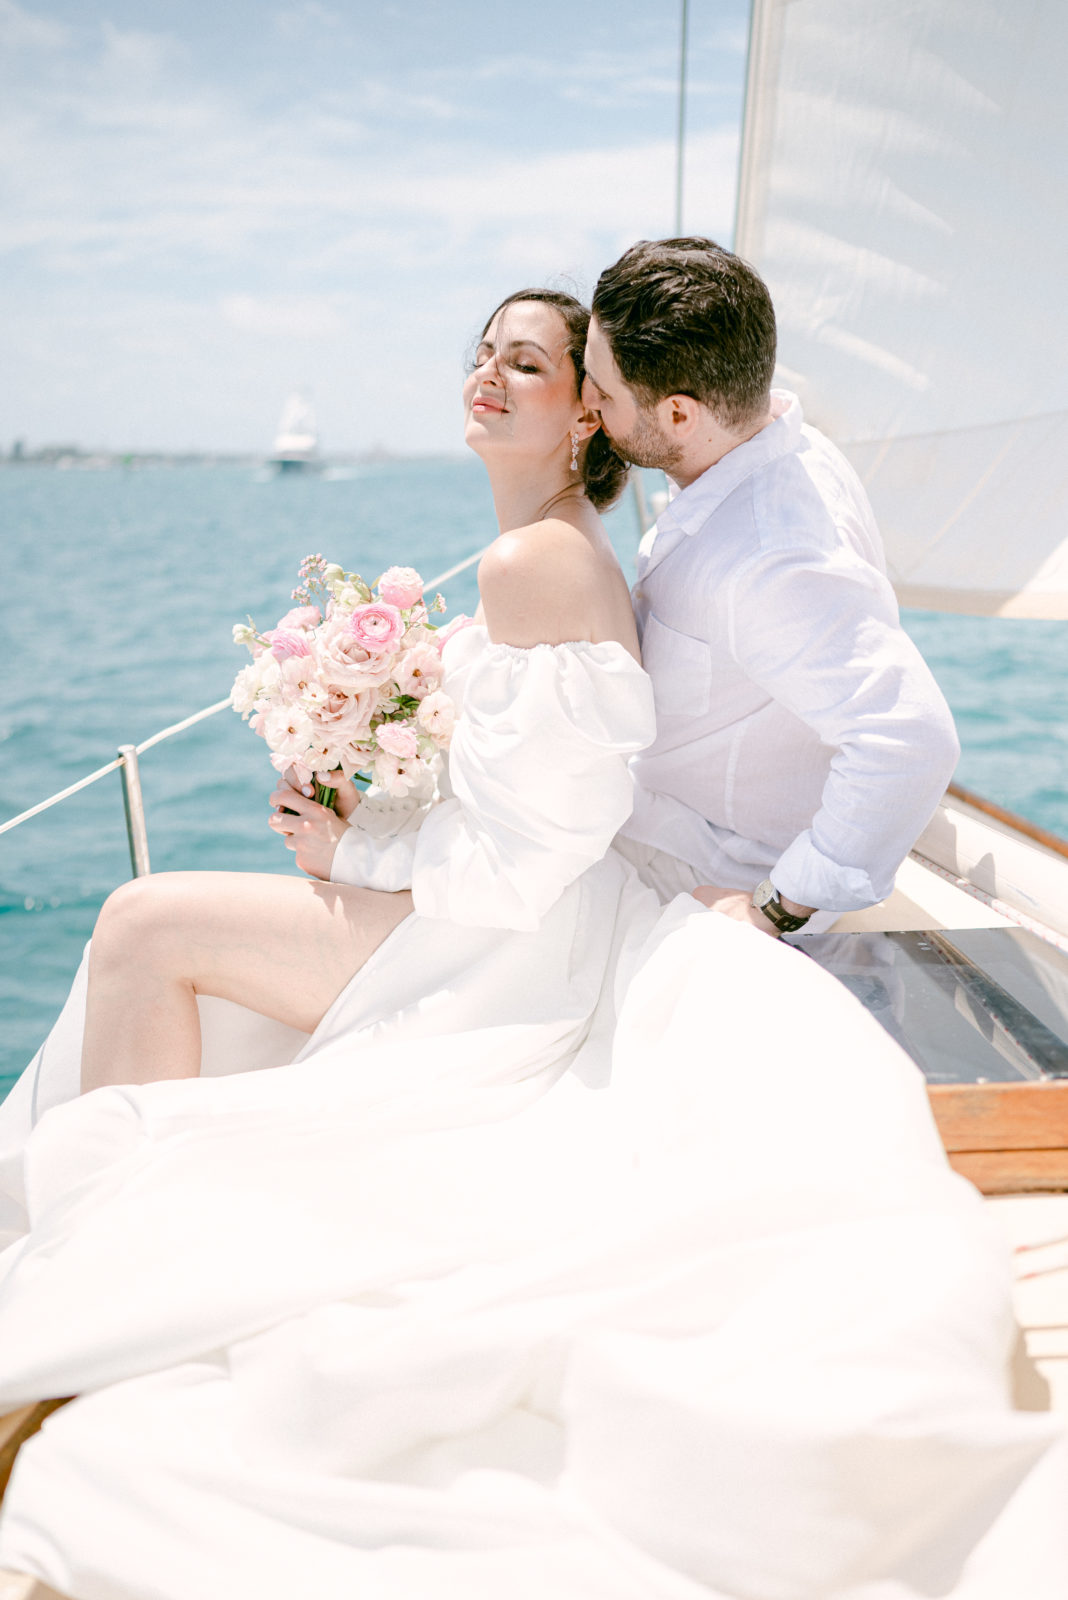 Bride and groom on a sailboat with beautiful florals during their magical wedding